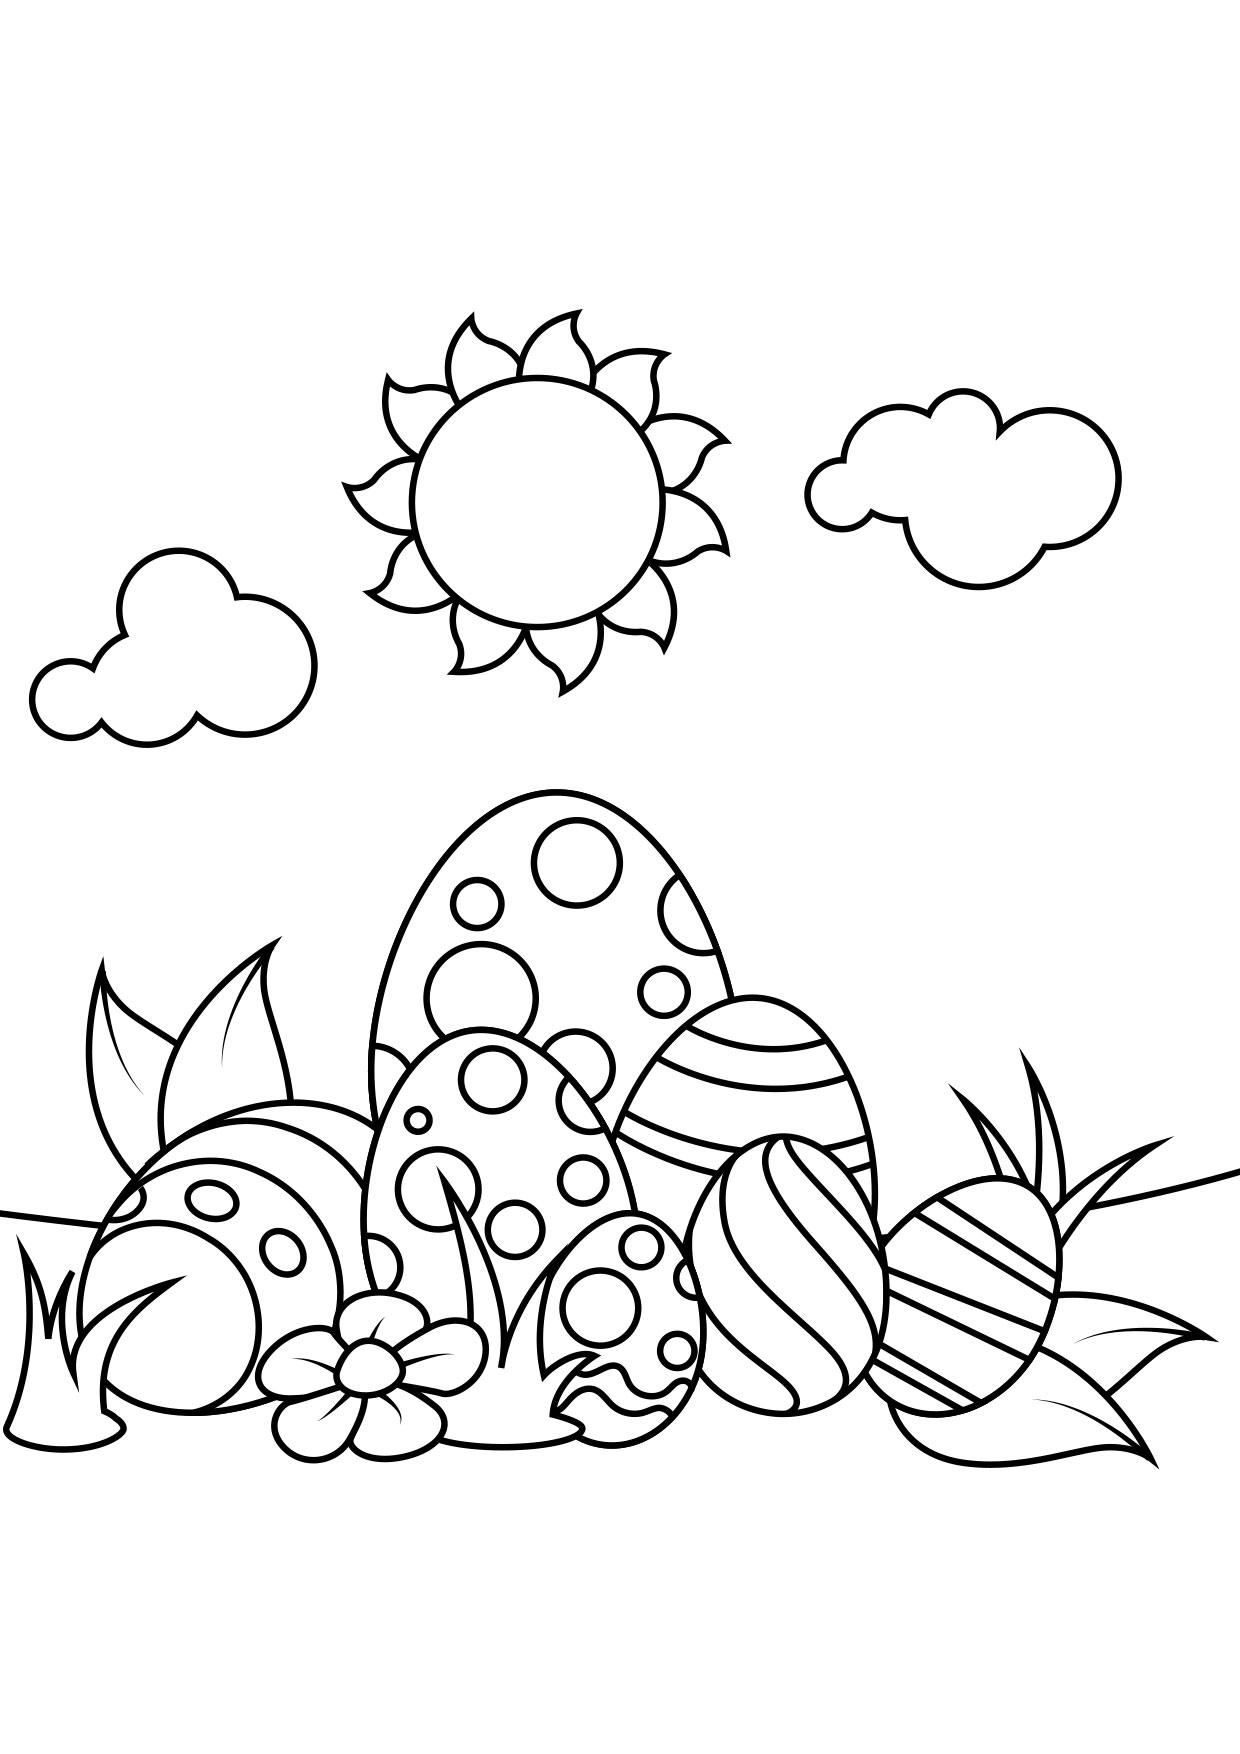 Download Coloring Page Easter eggs under the sun - free printable coloring pages